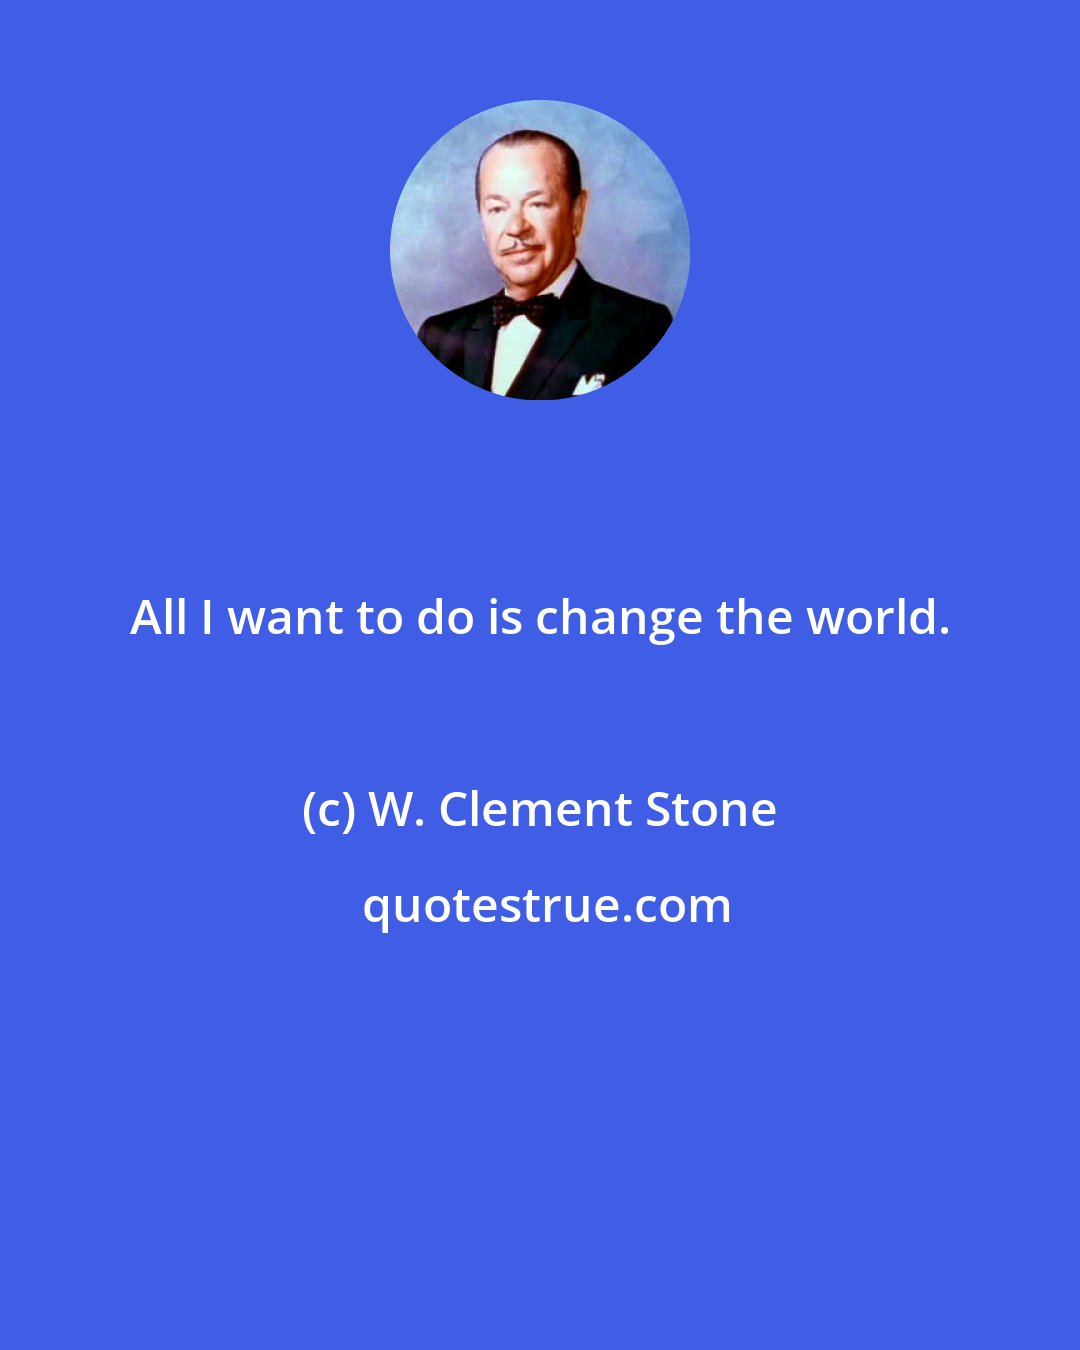 W. Clement Stone: All I want to do is change the world.